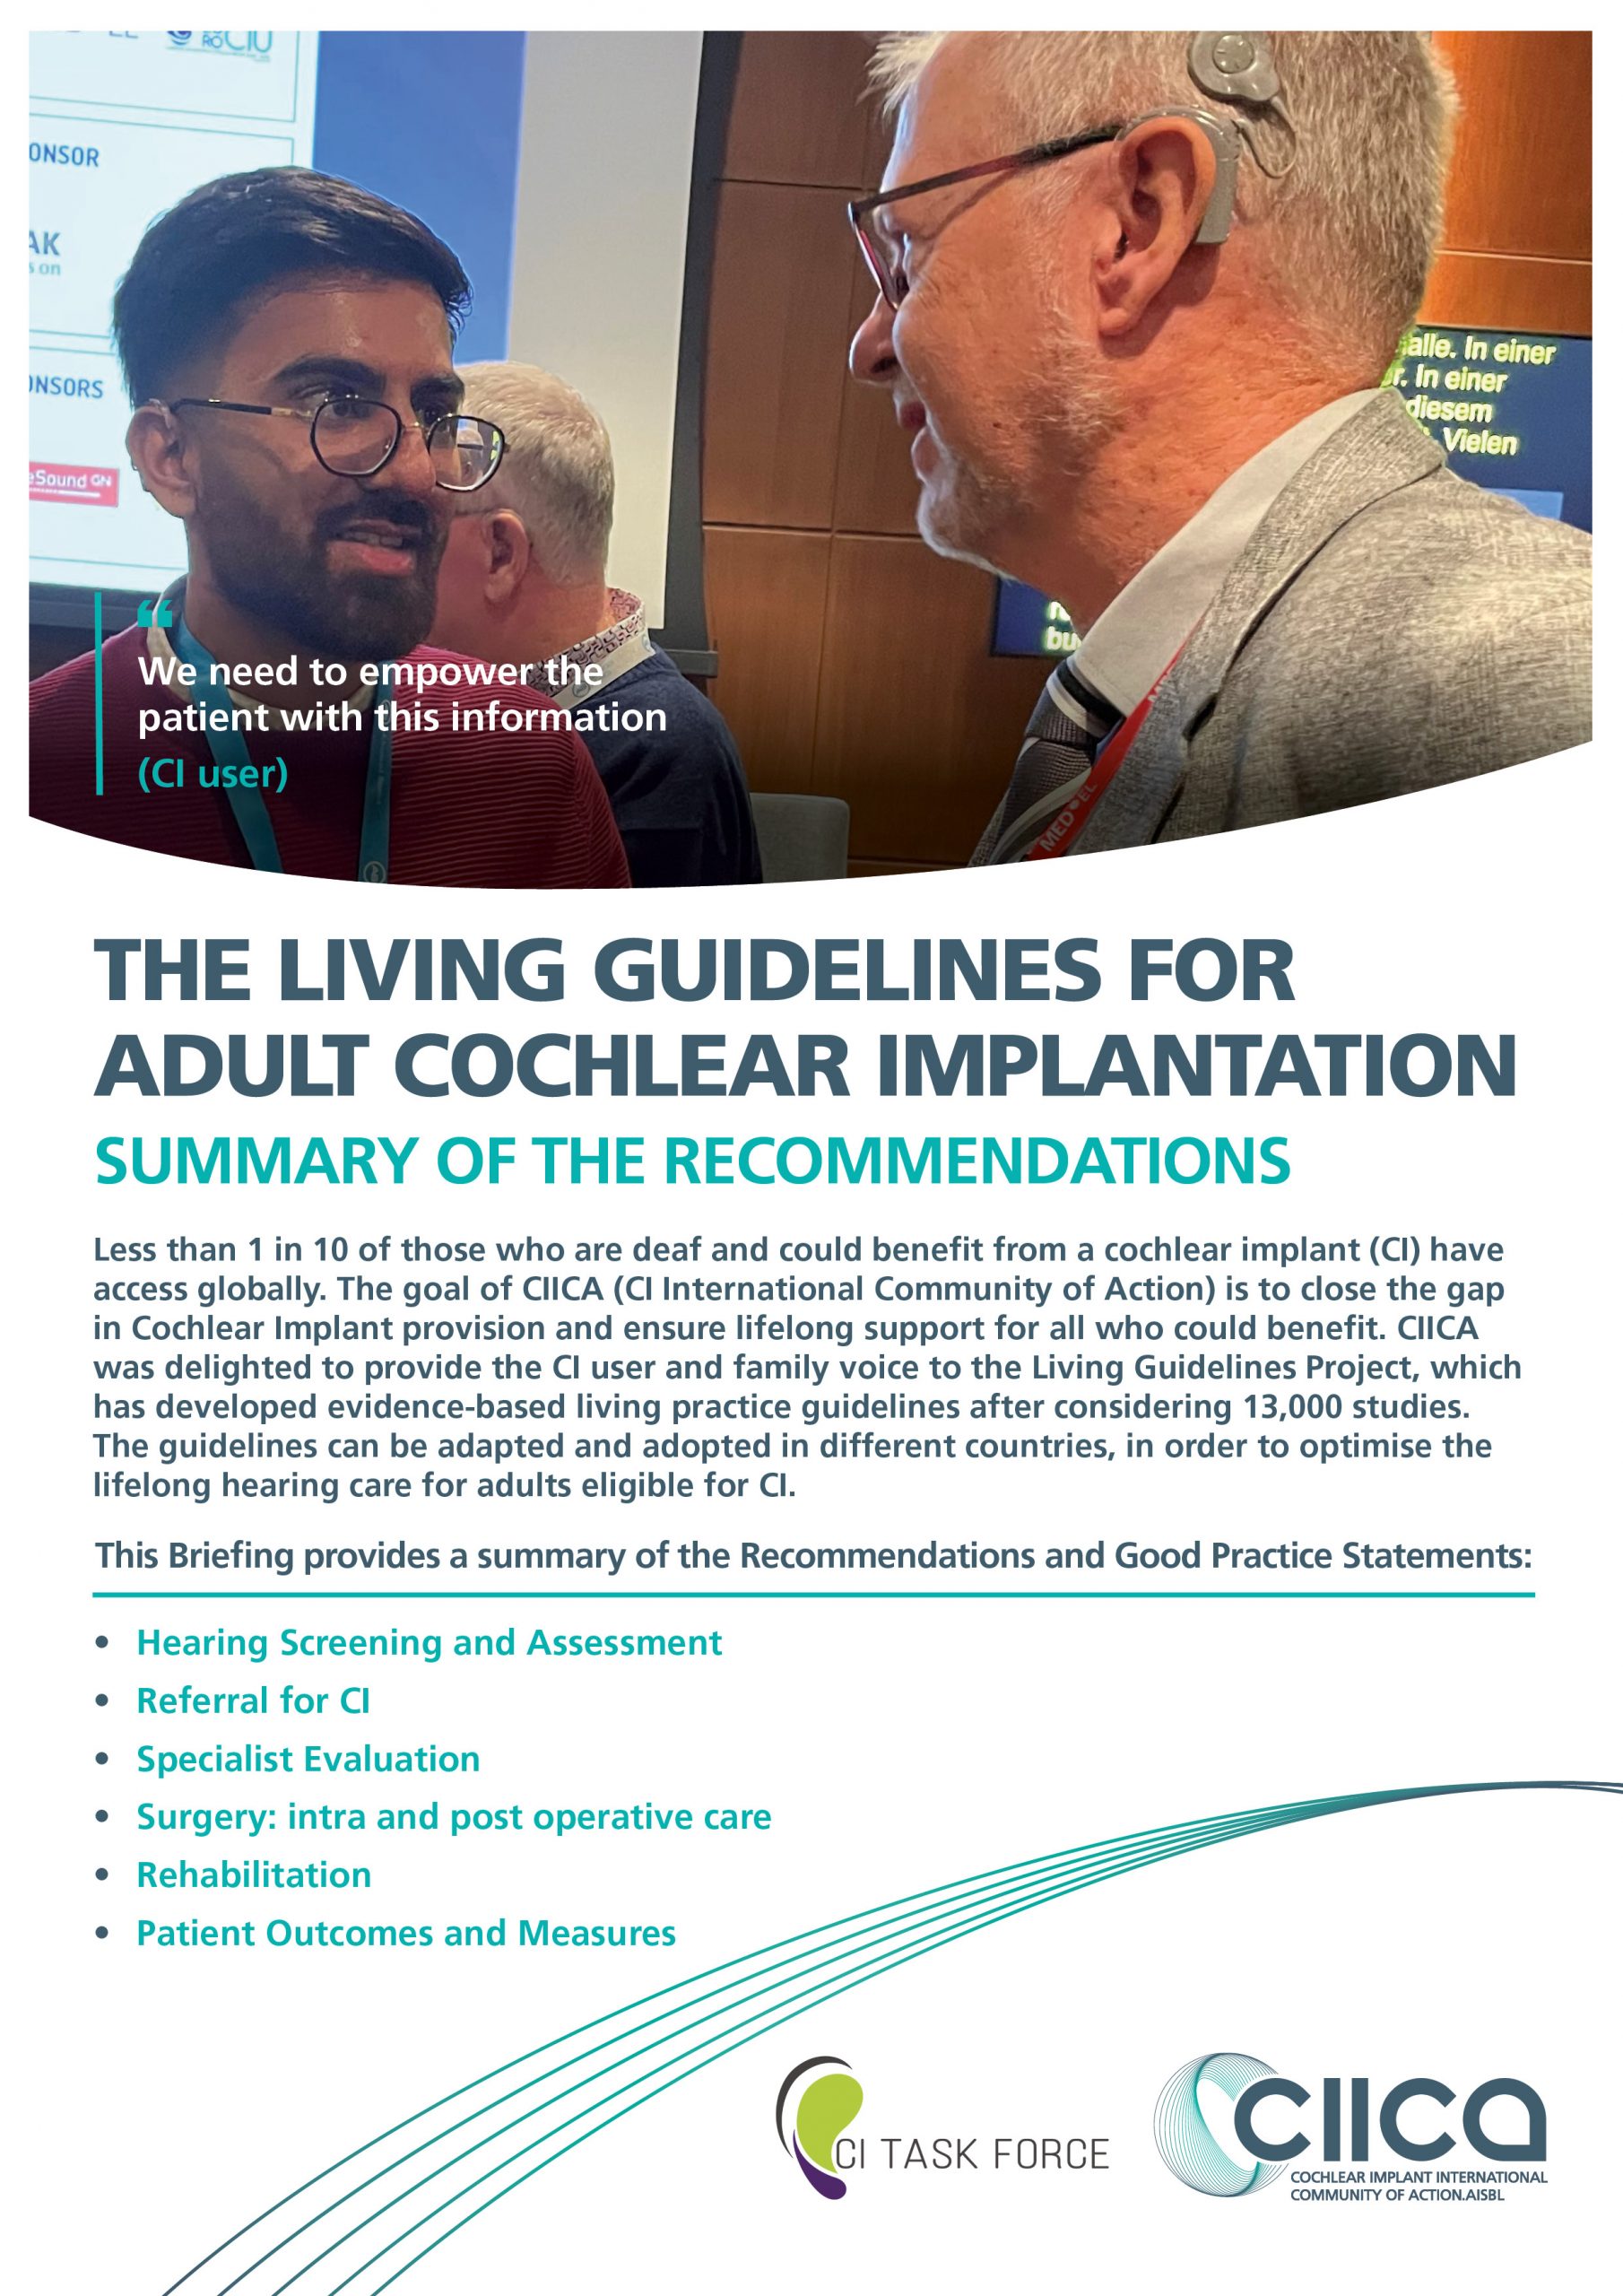 CIICA’s summary of The Living Guidelines for Adult CI